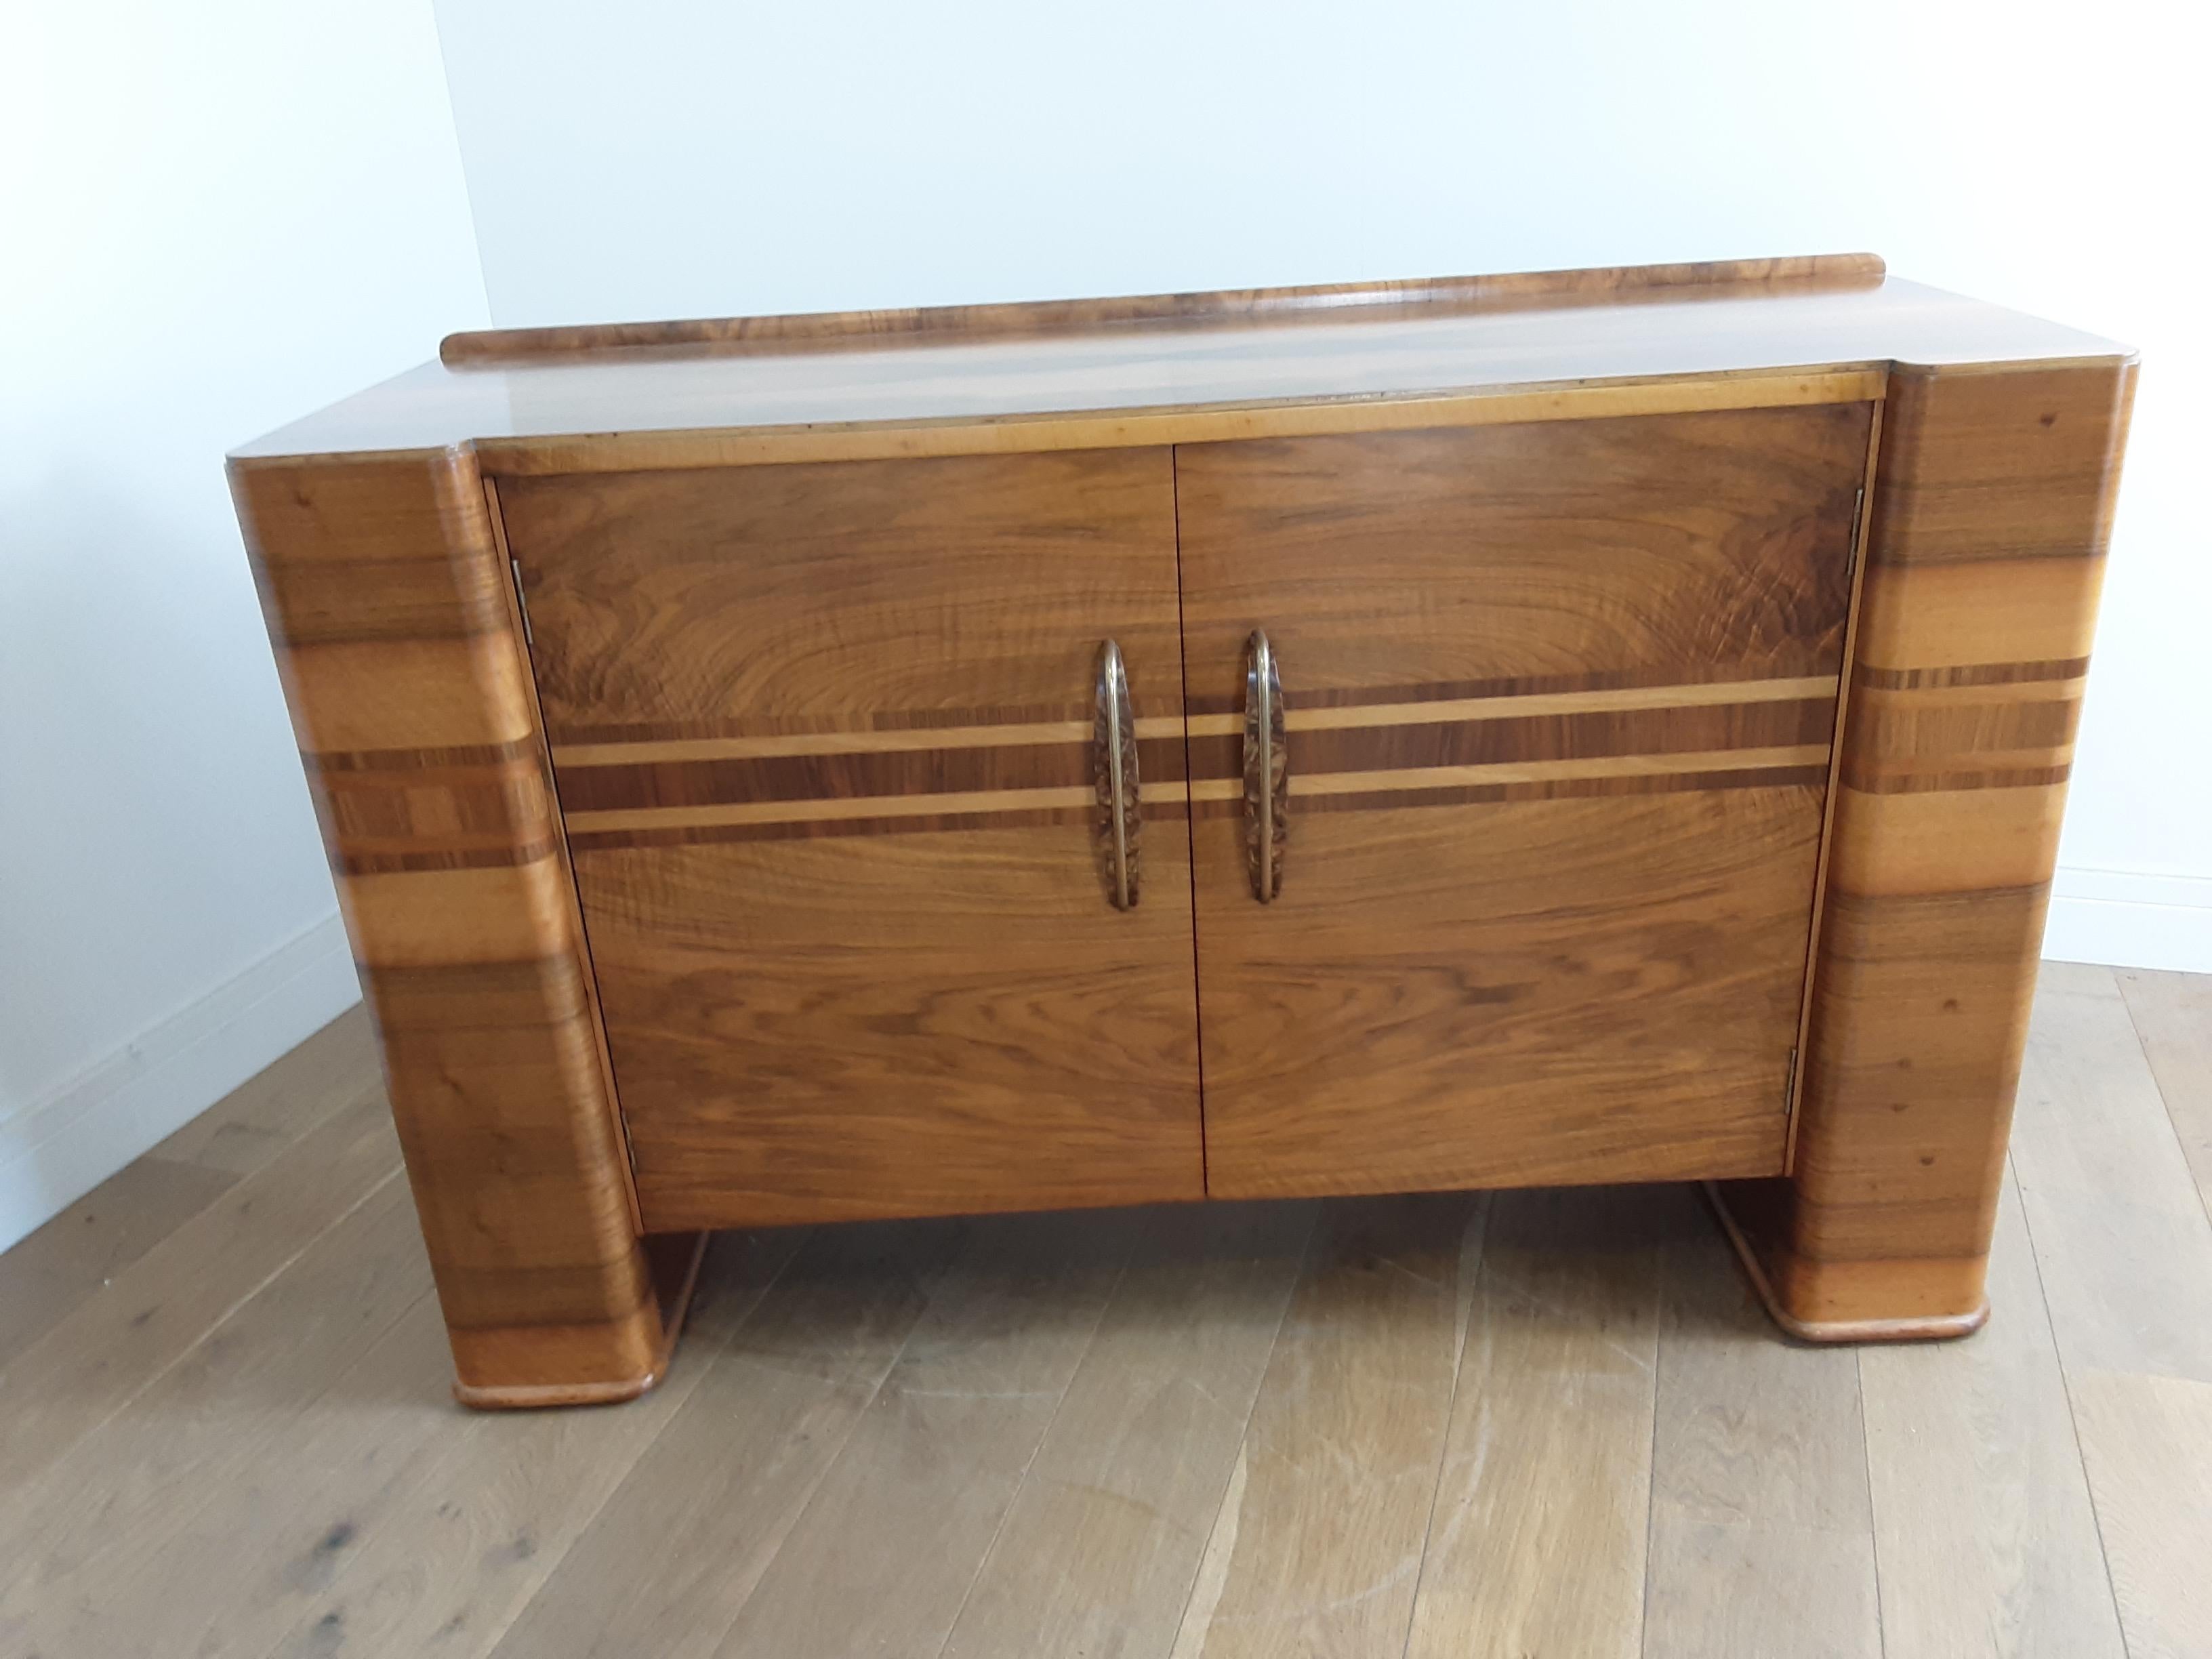 Scottish Art Deco Sideboard in a Golden Brown Walnut with a Modernist Design For Sale 4